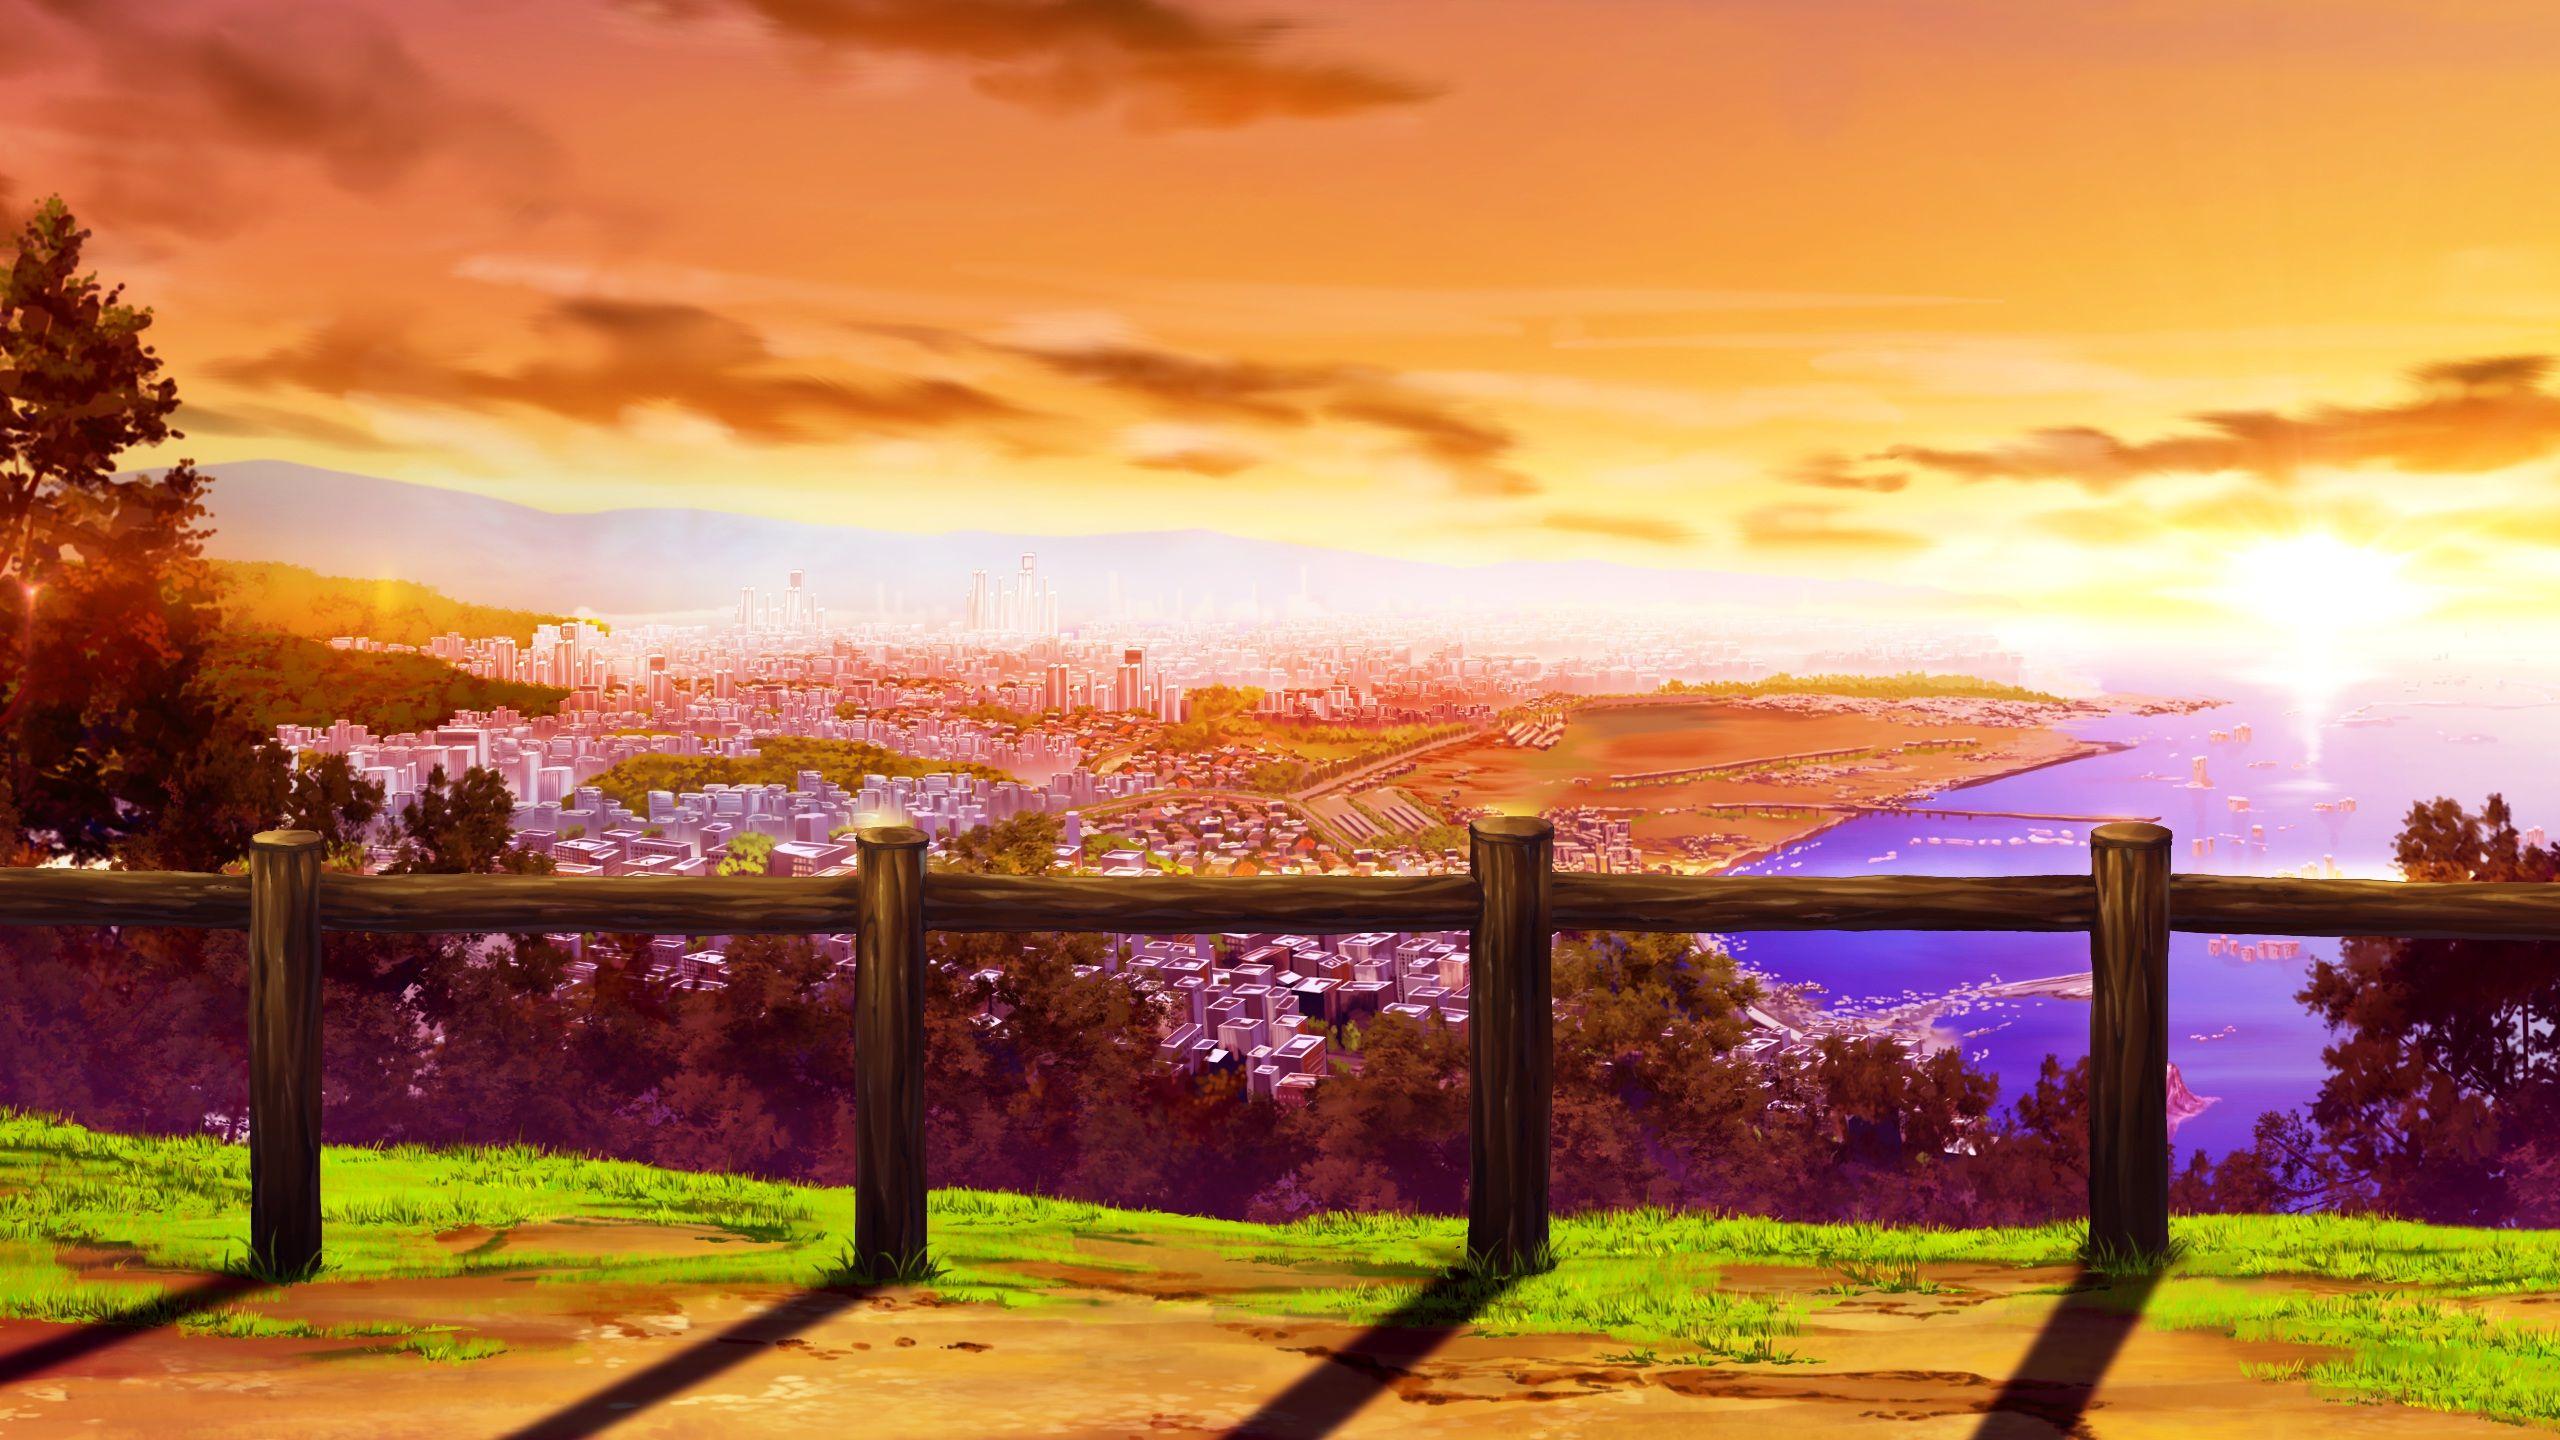 Sunset Anime Scenery Wallpapers - Top Free Sunset Anime Scenery